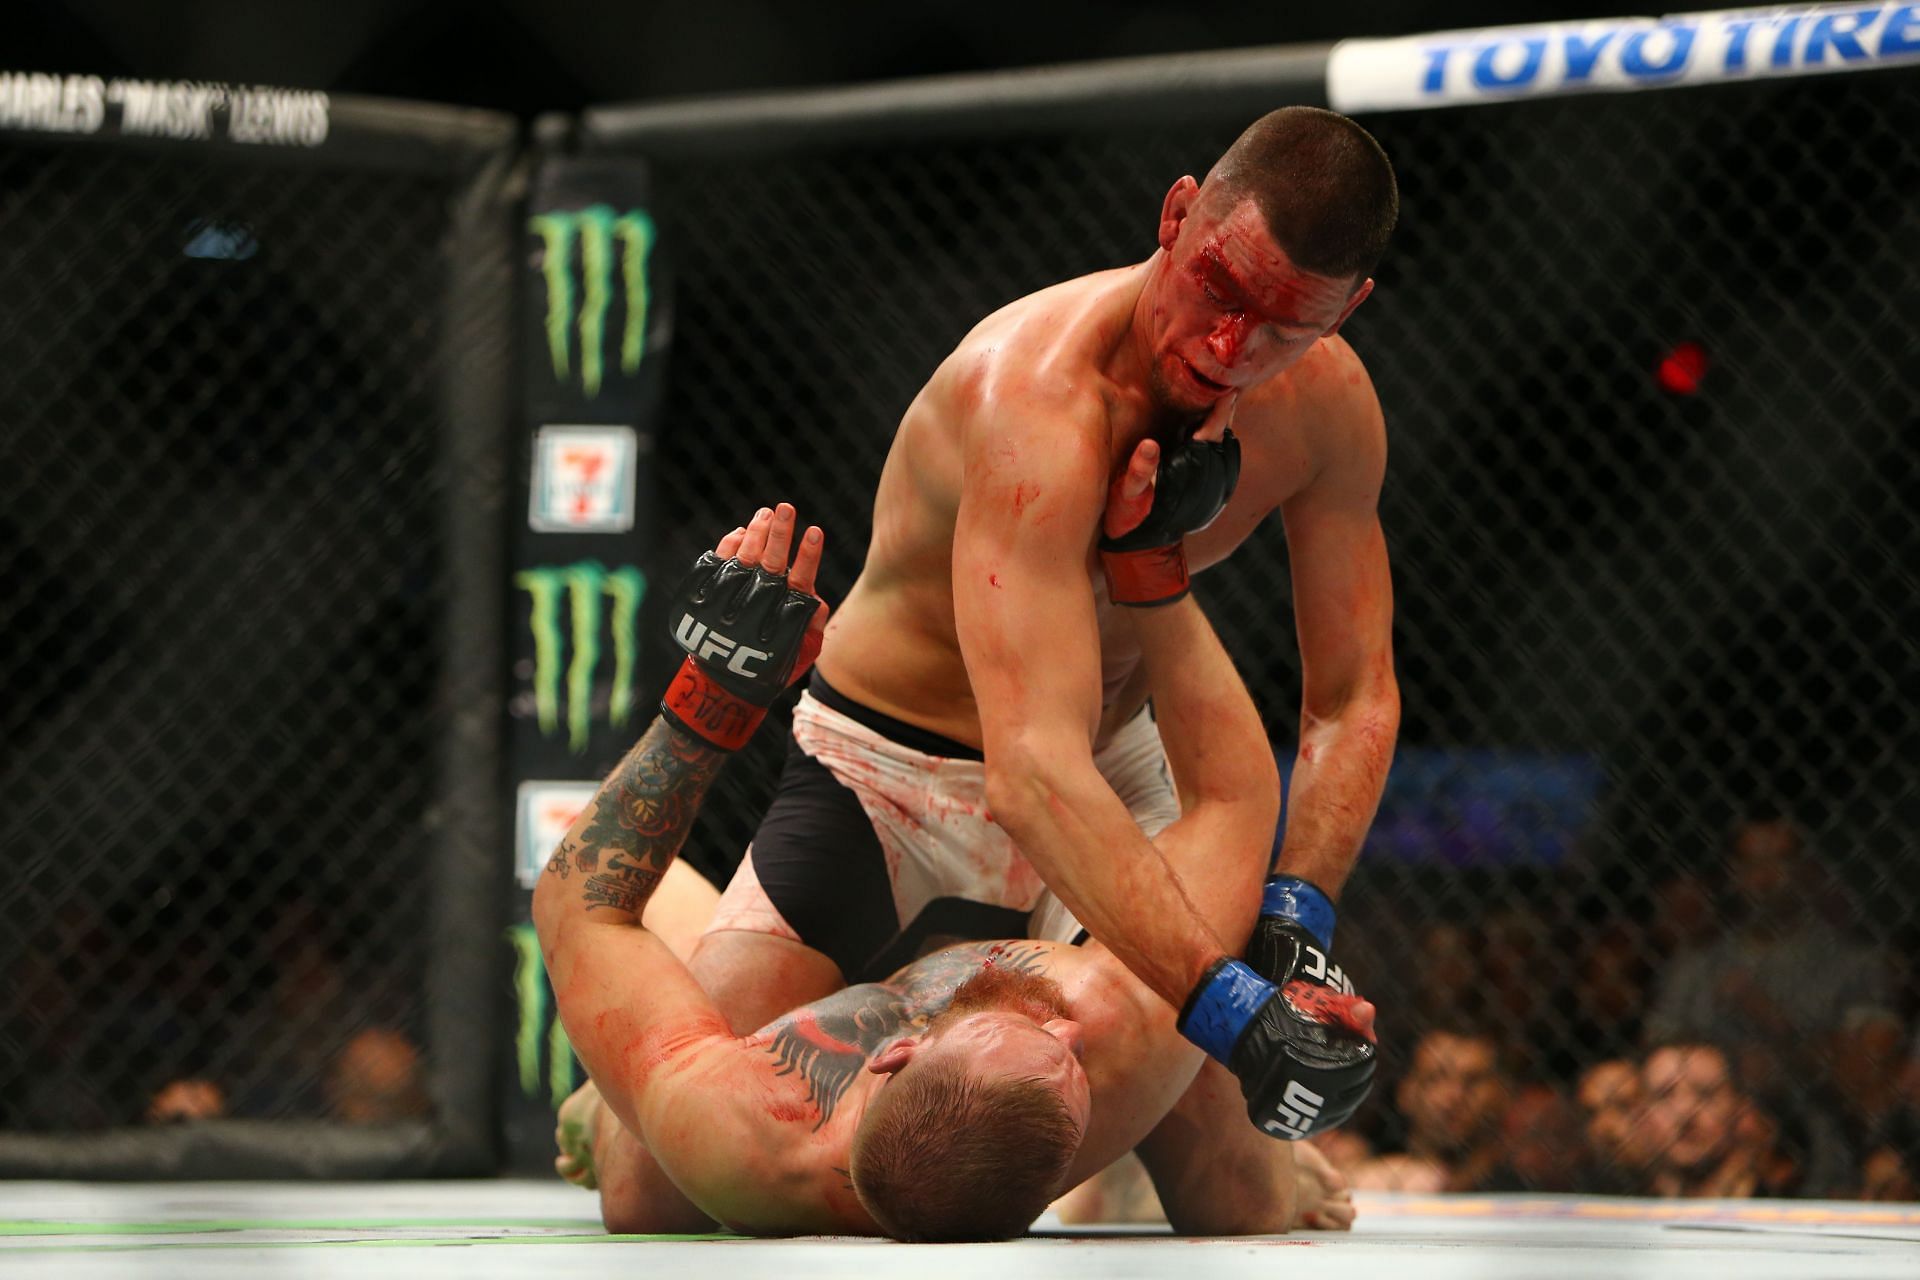 Nate Diaz (top) and Conor McGregor (bottom) at UFC 196